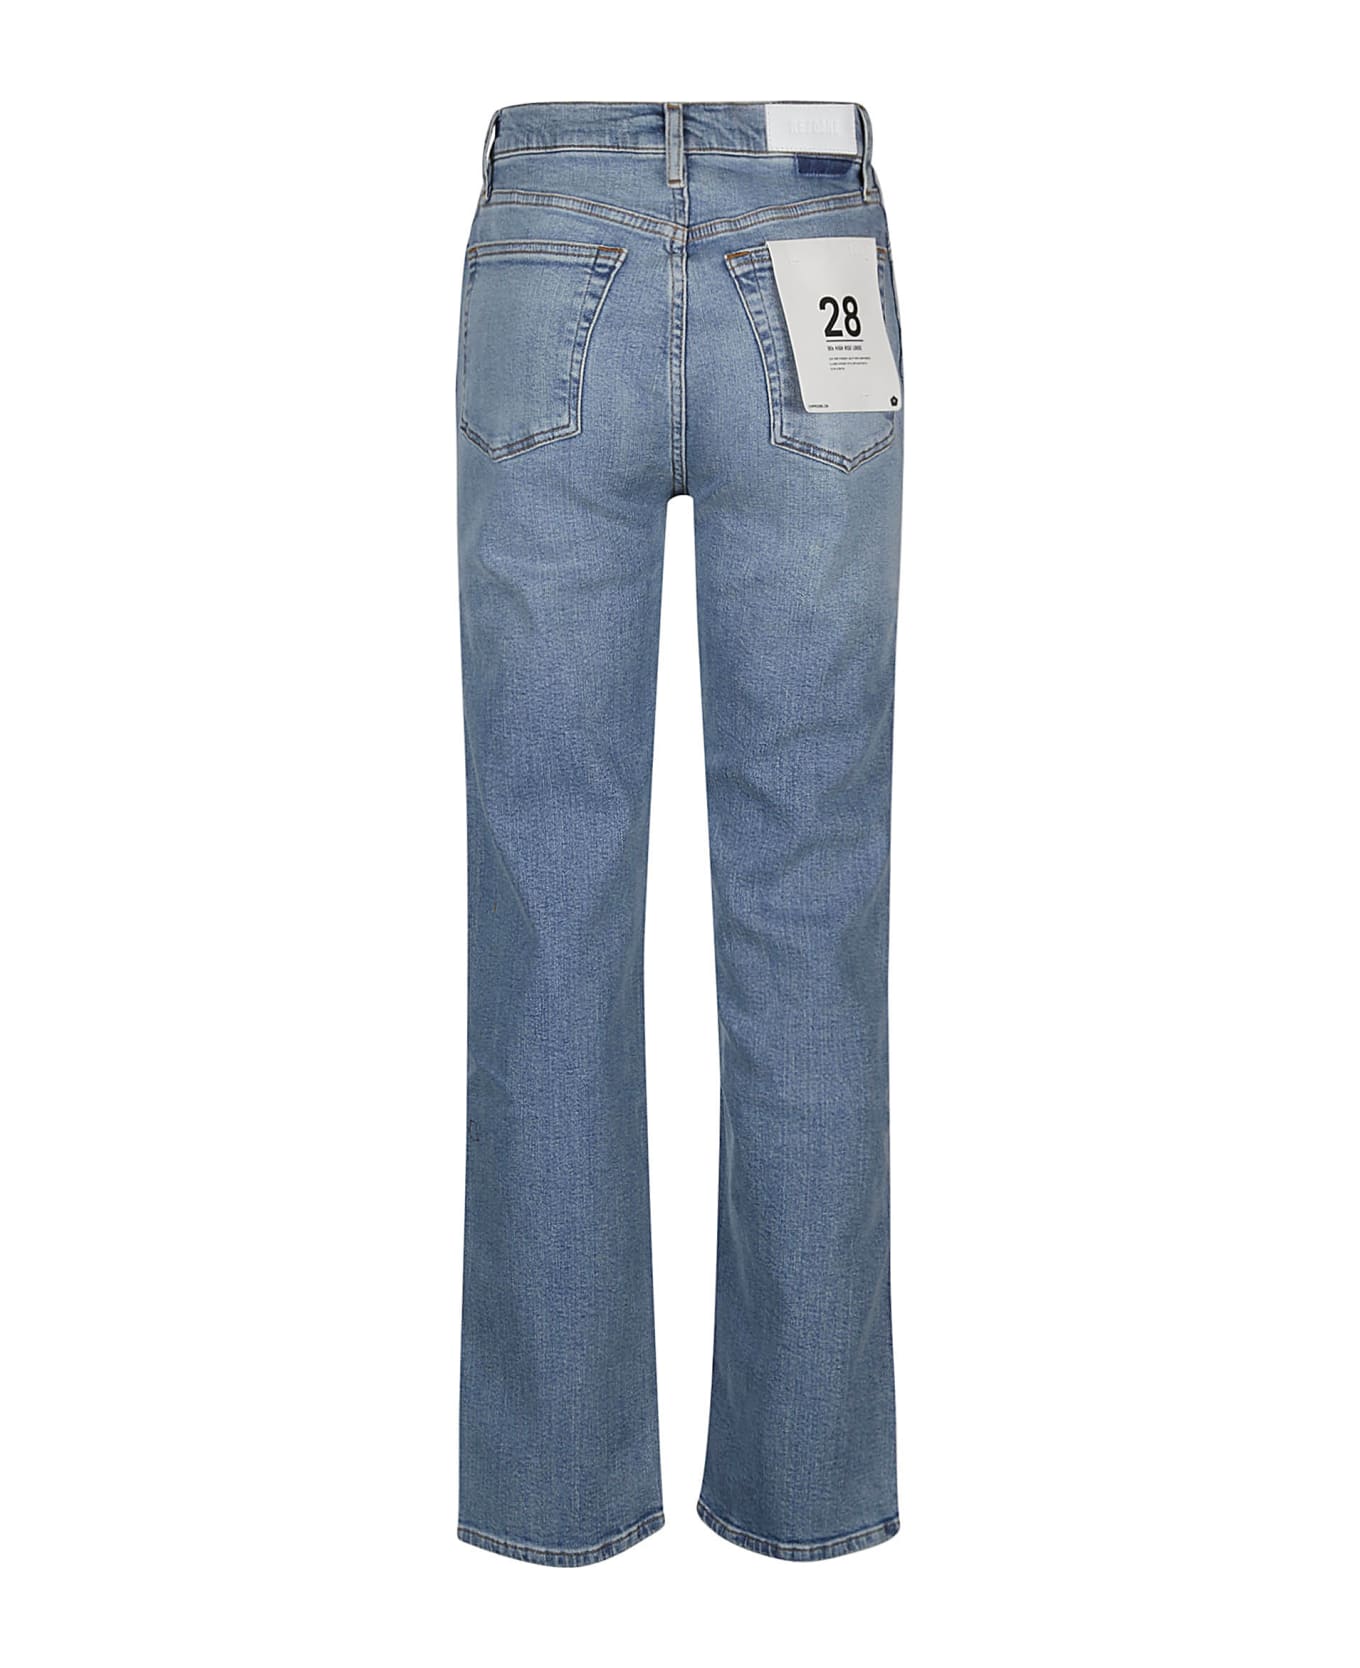 RE/DONE 90s High Rise Loose Jeans - Rio Fade